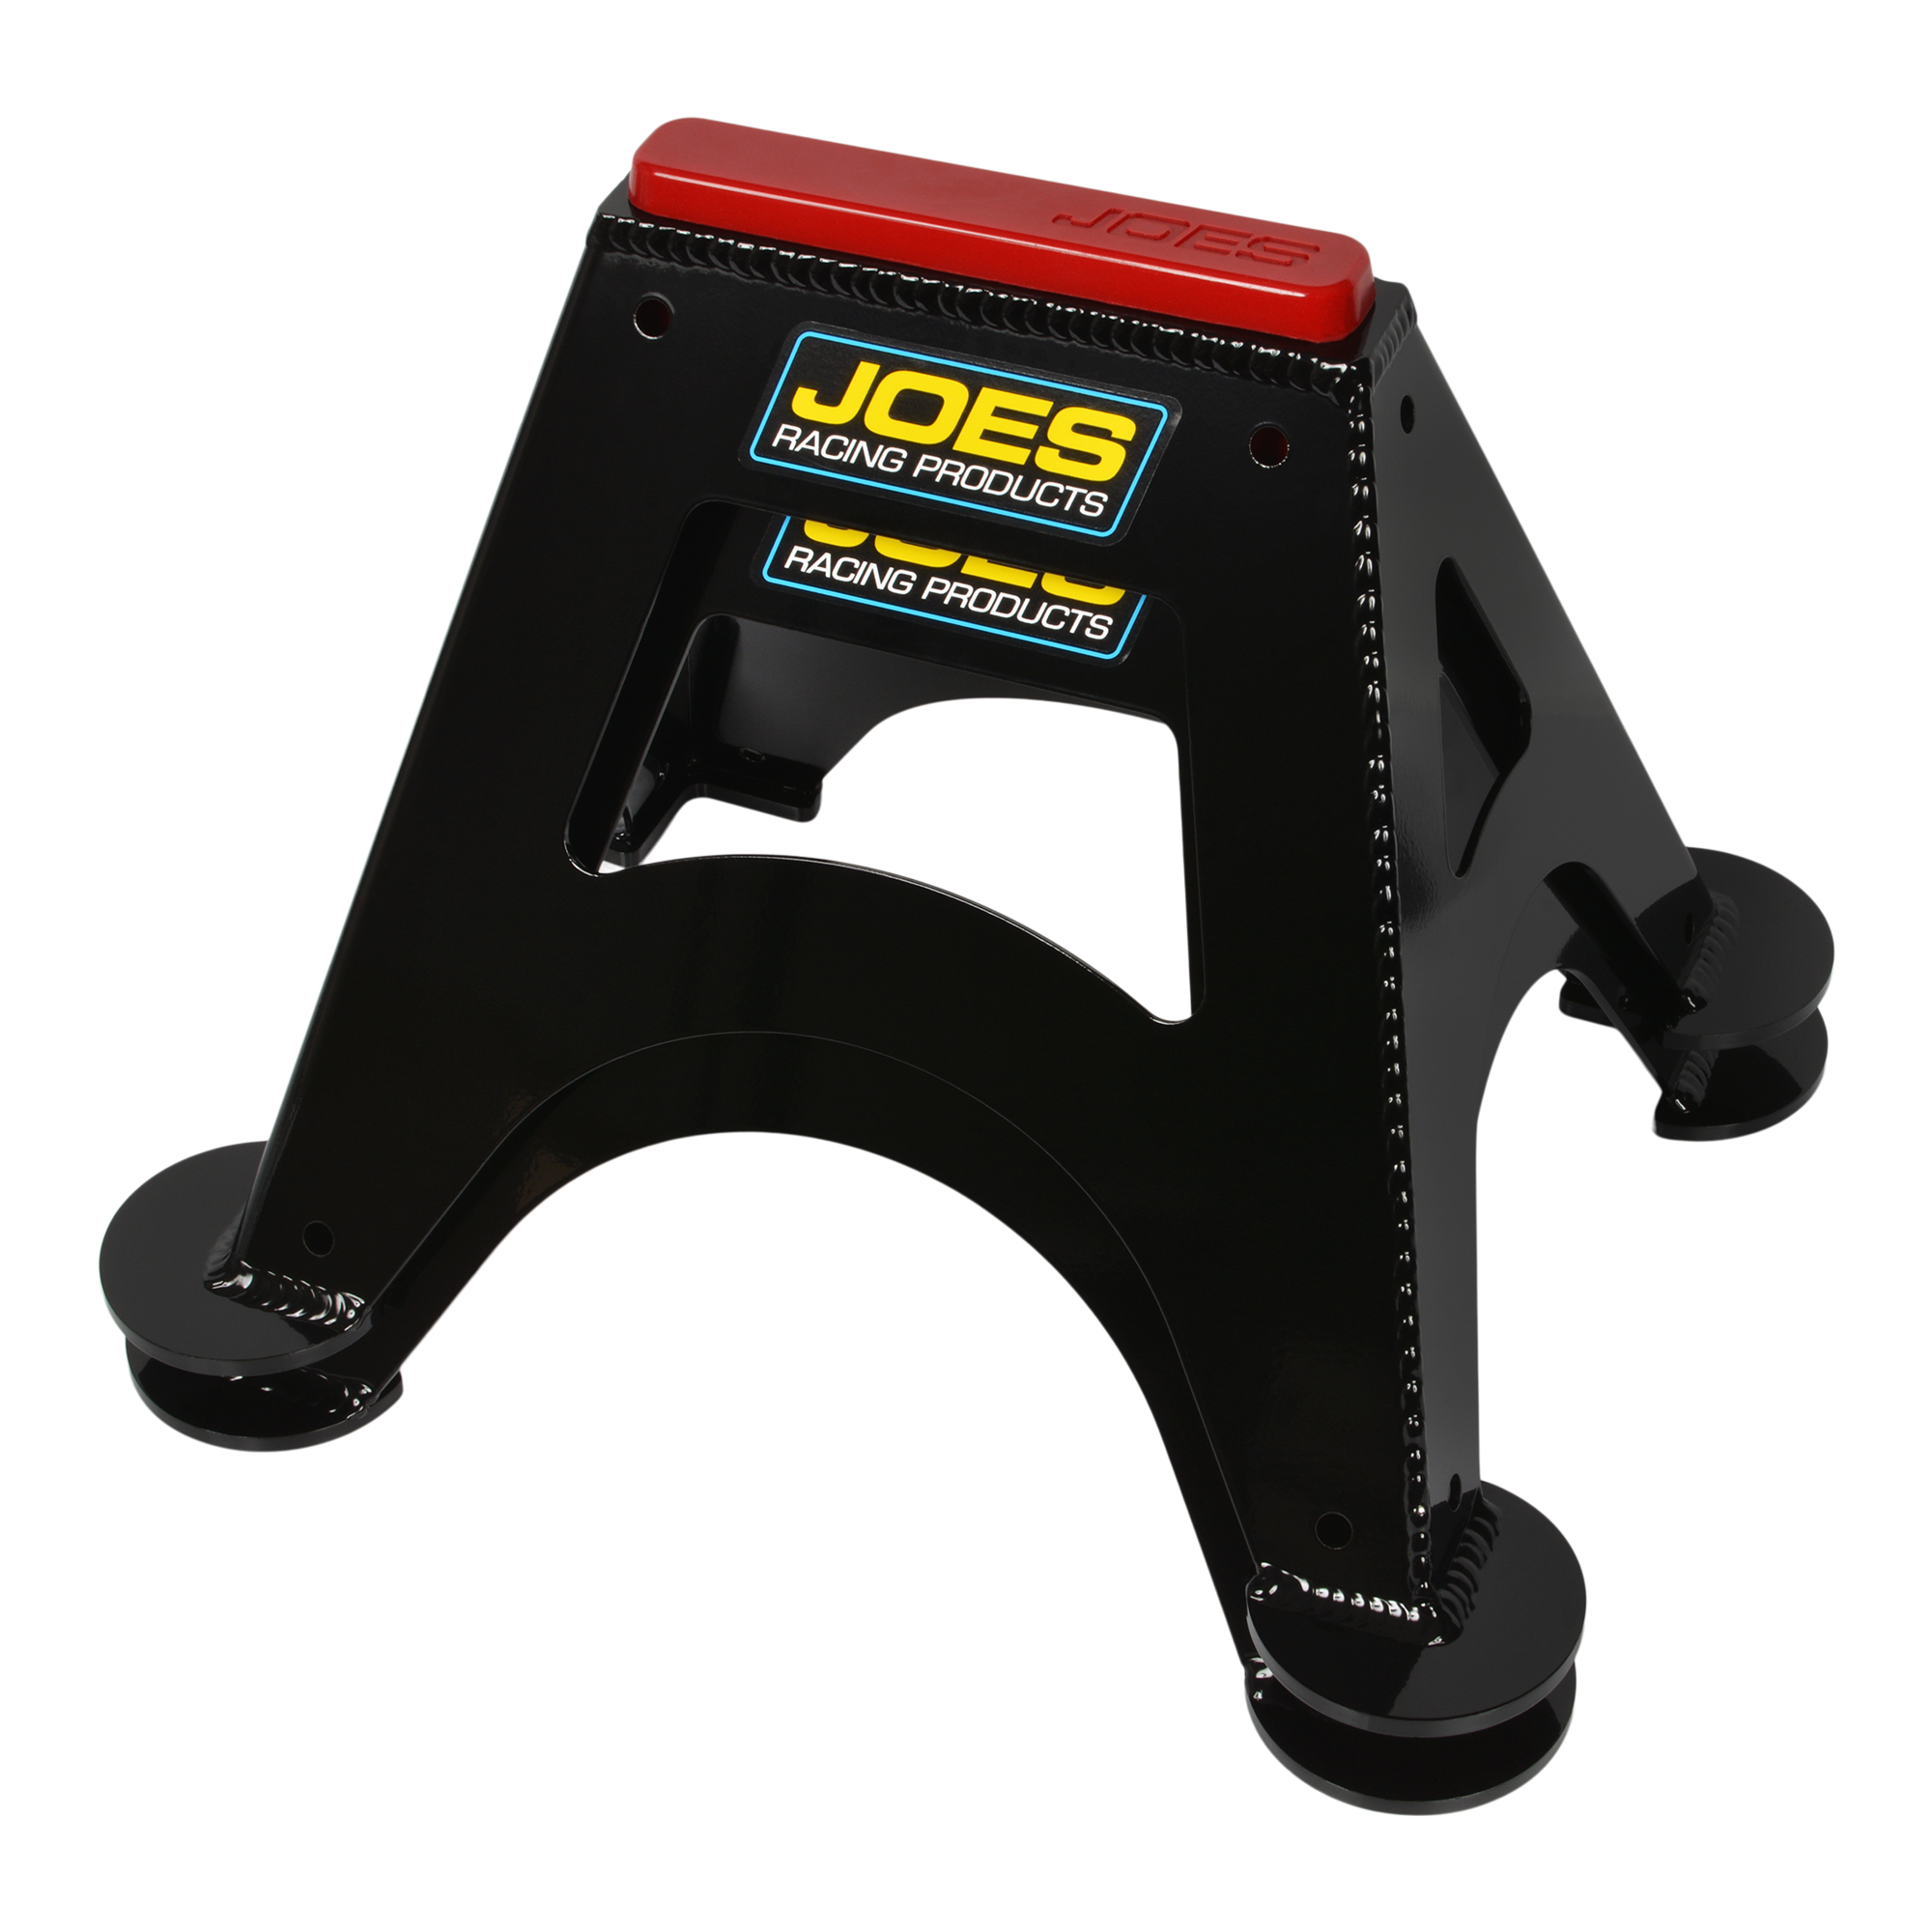 JOES 12 Jack Stands, Black - JOES Racing Products